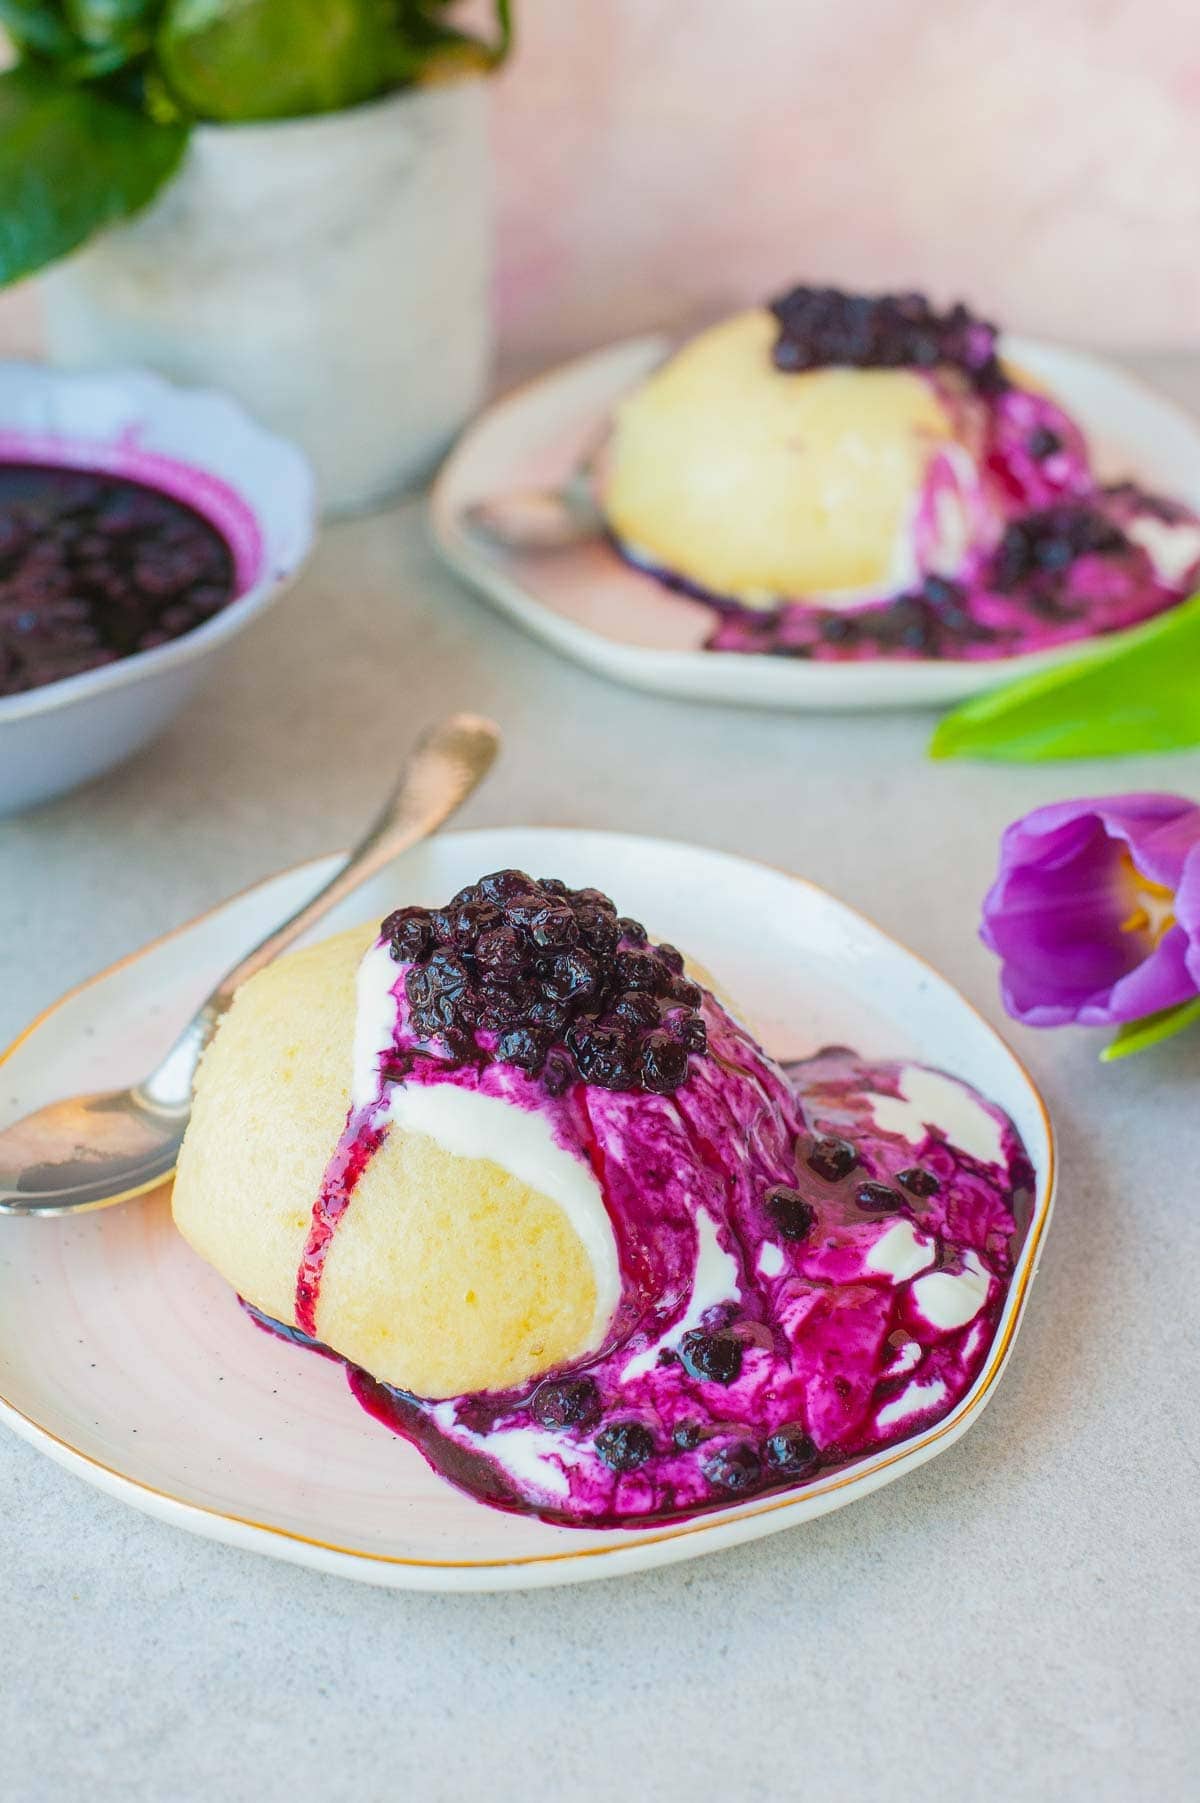 Fluffy sweet steamed buns with blueberry sauce - Everyday Delicious